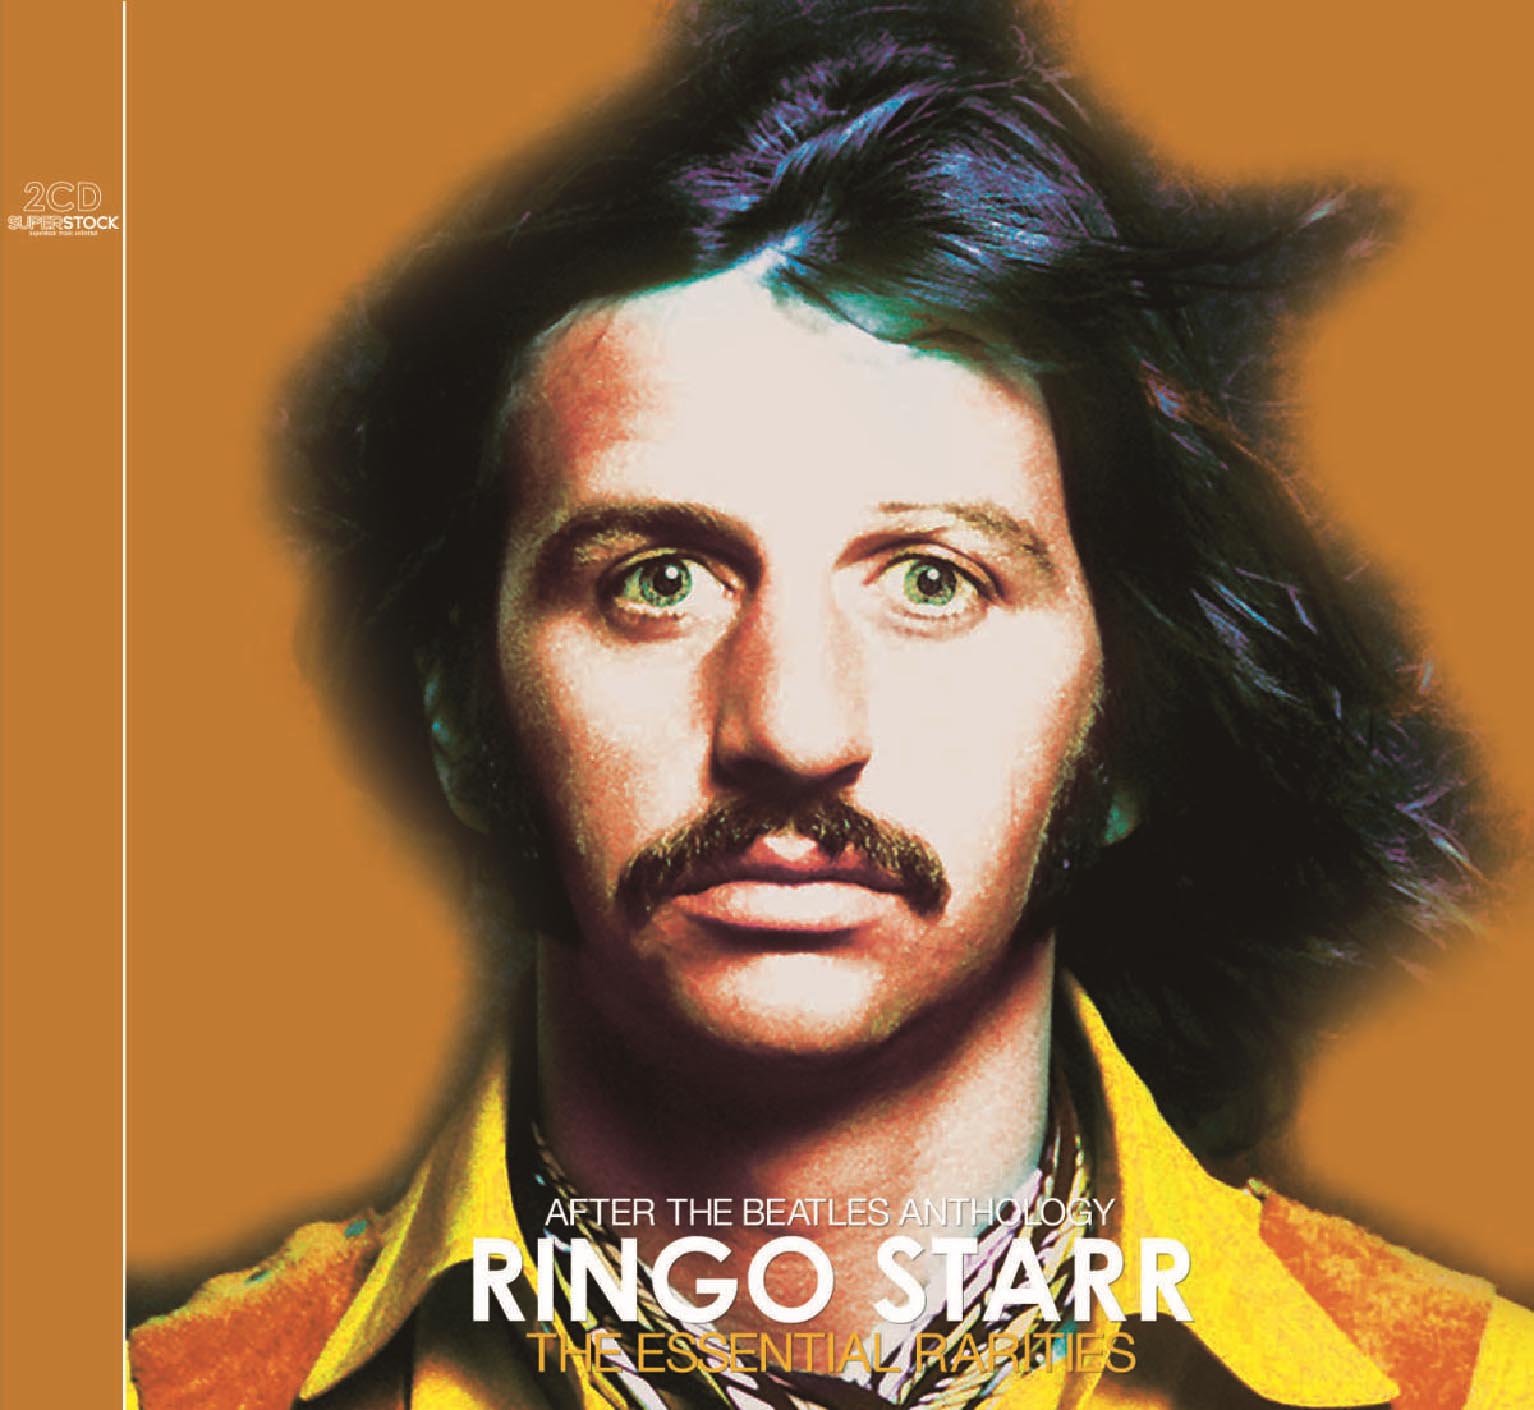 RINGO STARR - THE ESSENTIAL RARITIES : AFTER THE BEATLES ANTHOLOGY (2CD) -  navy-blue